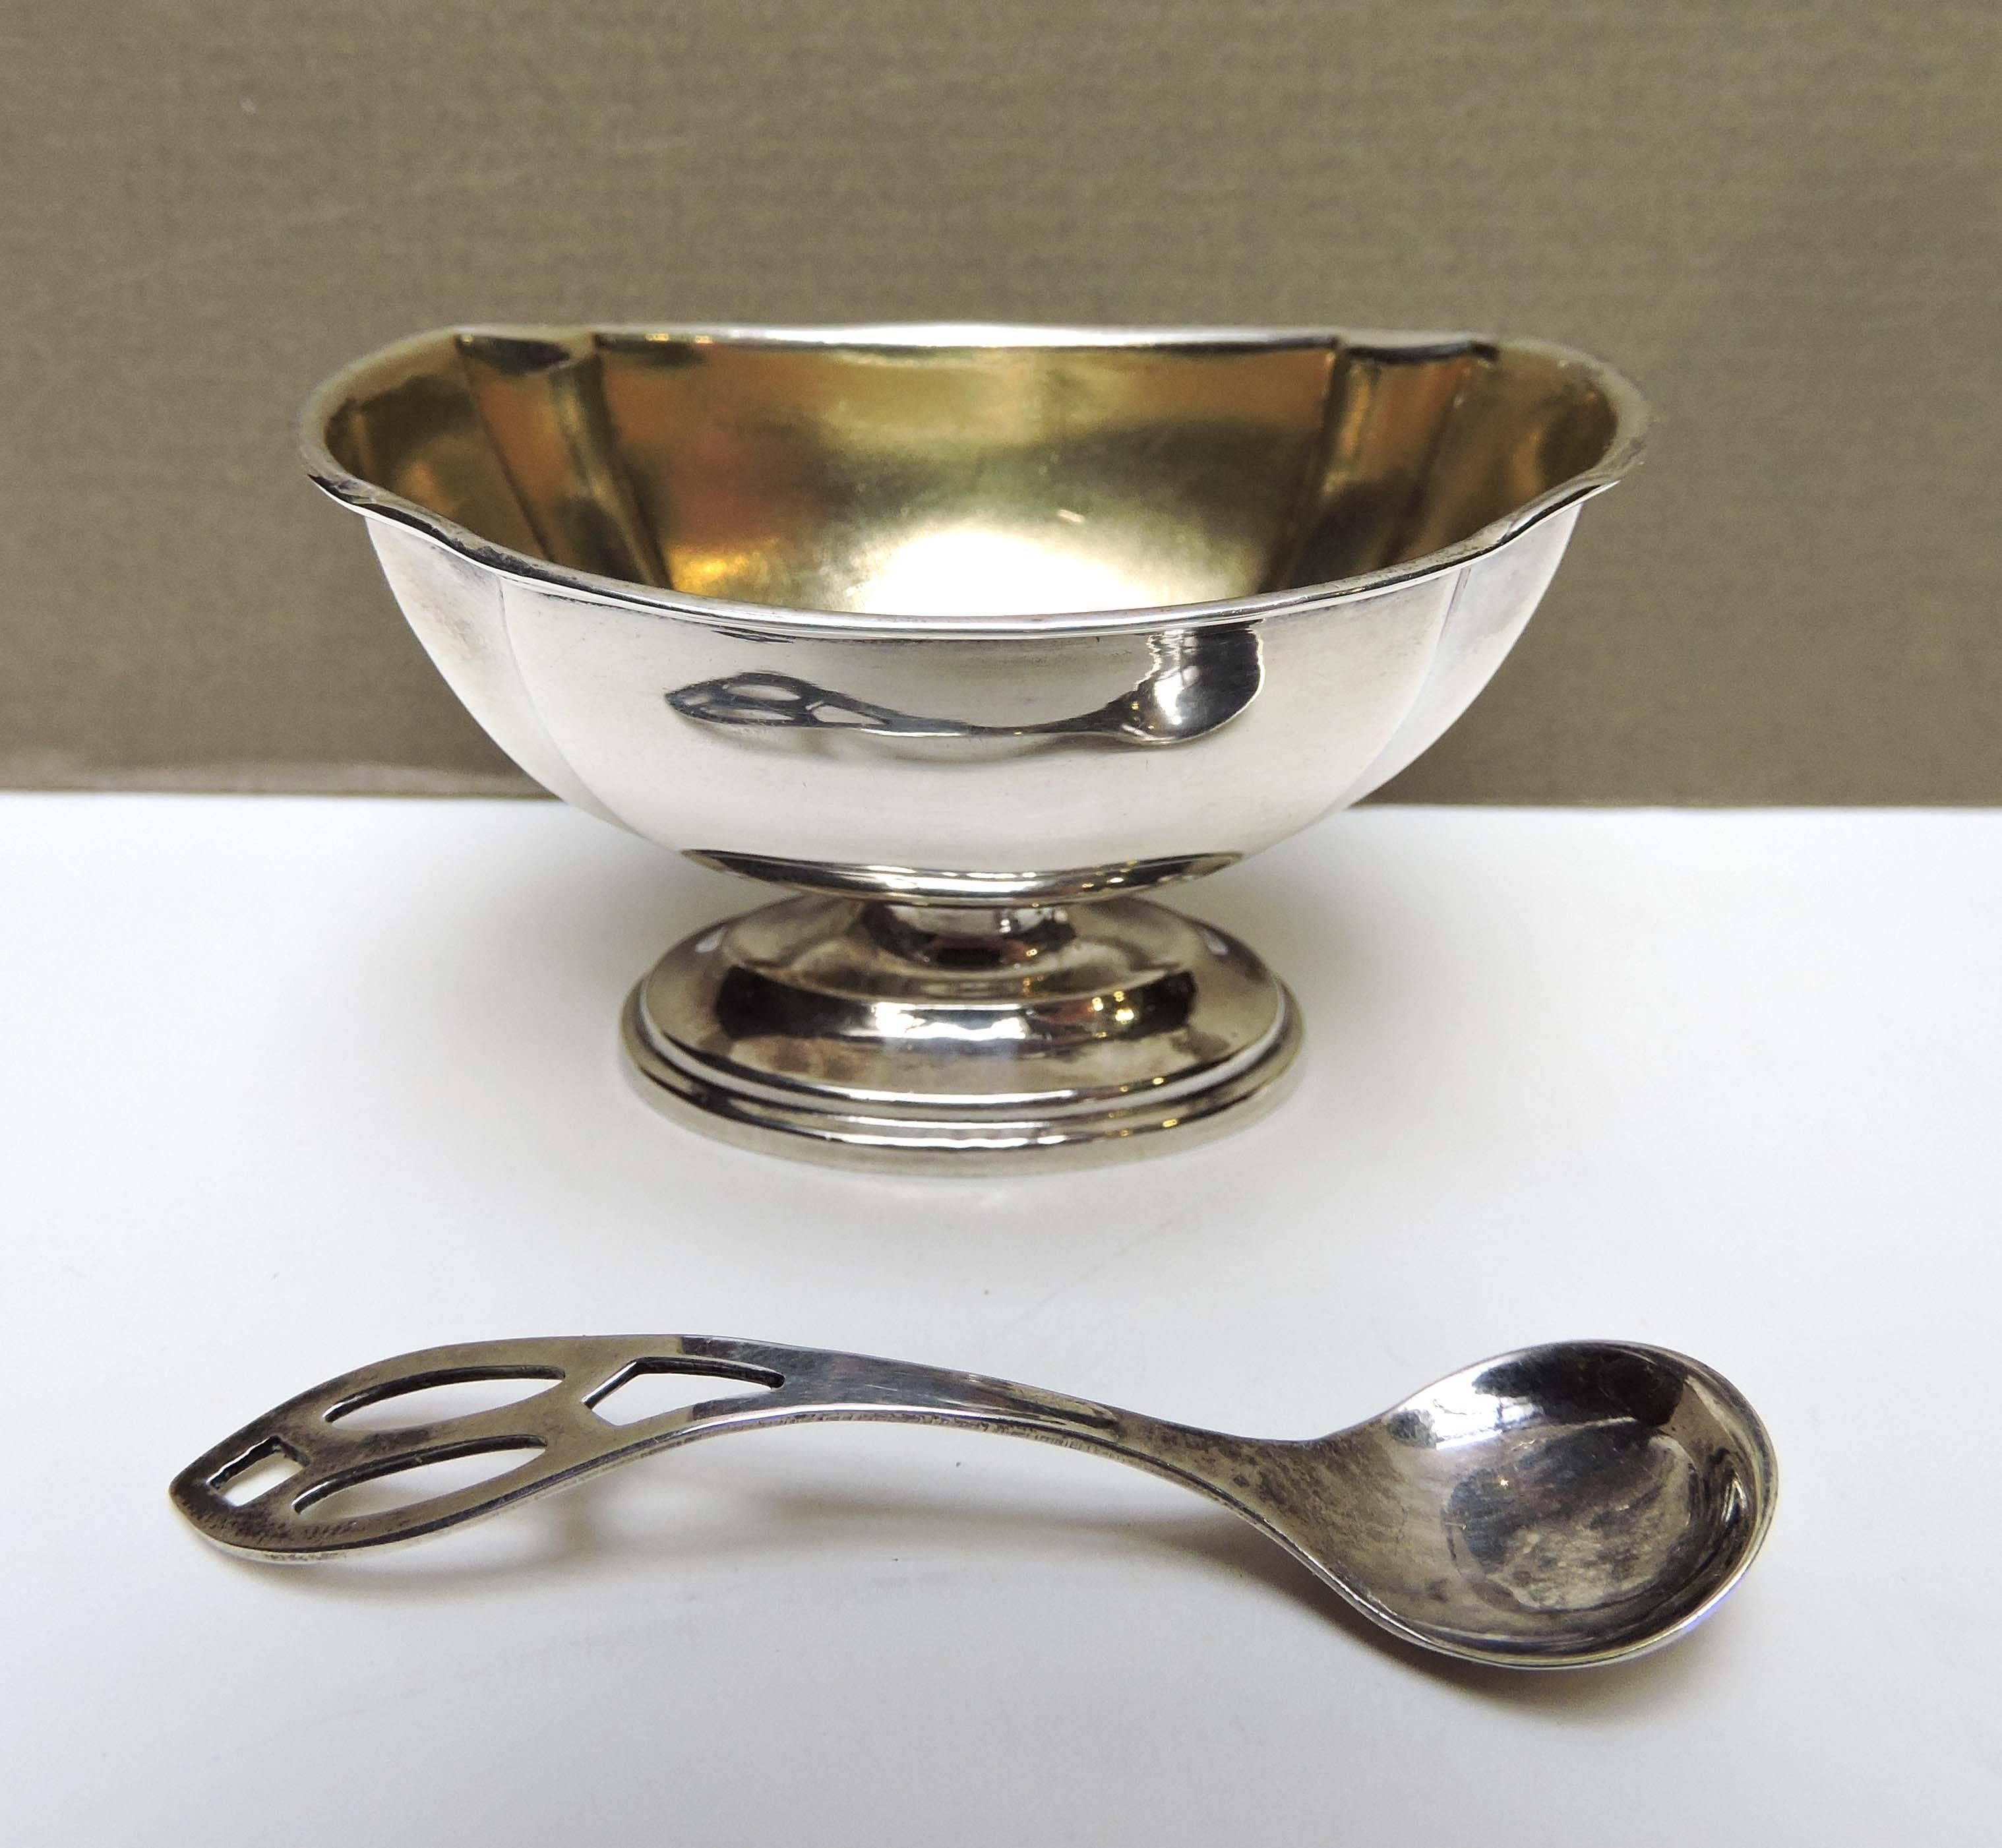 This is a set of six sterling arts and crafts silver salt cellars with matching spoons, by Webster company of North Attleboro, Massachusetts.

Each cellar consists of an oval high polish bowl with a delicate rolled rim, four quadrants of impressed